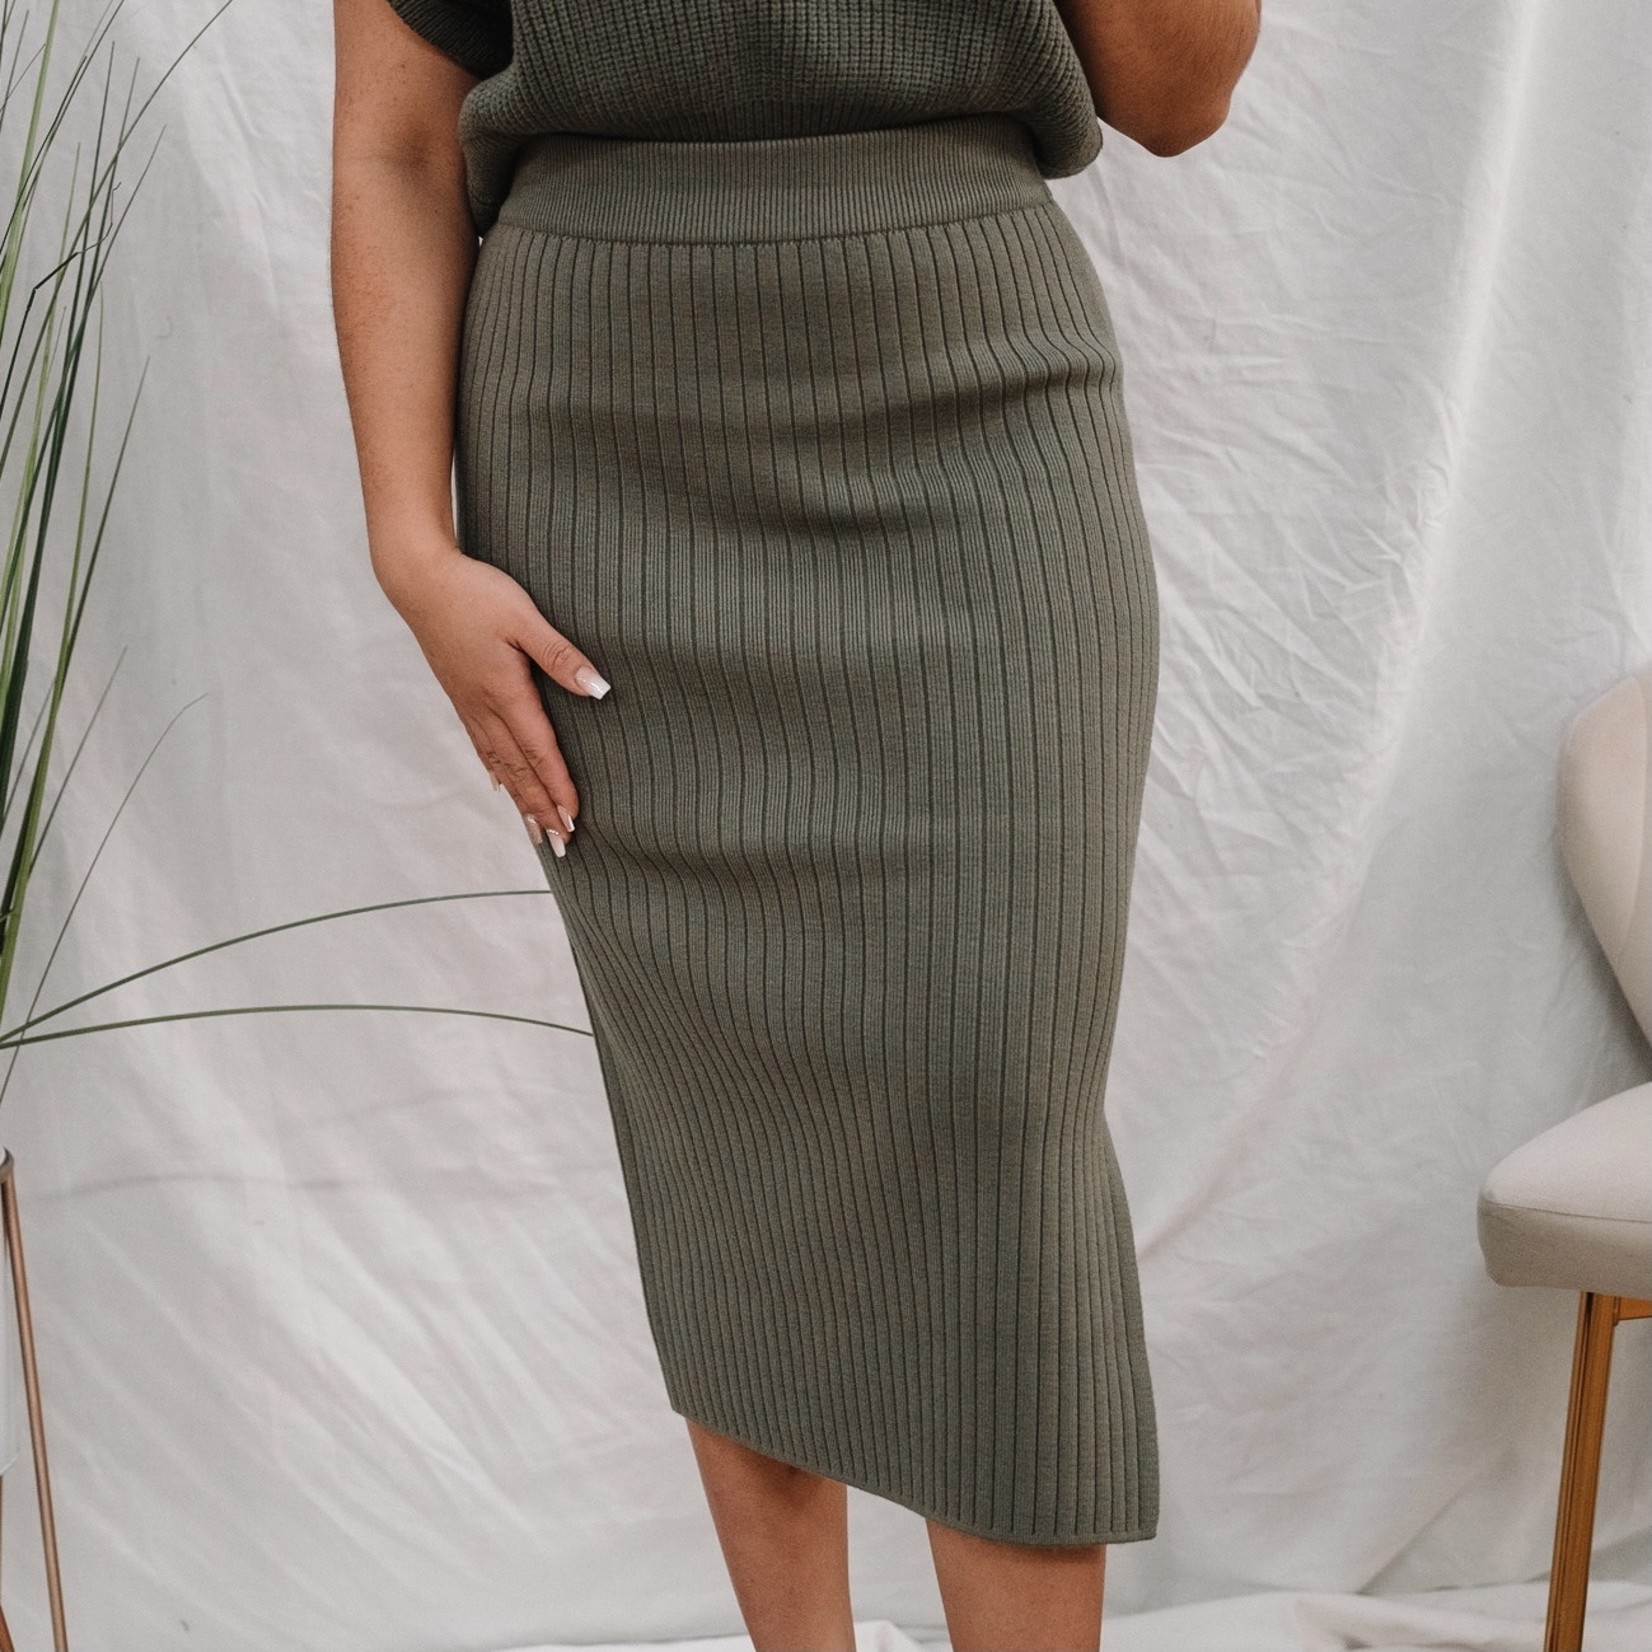 Apricot - vertical ribbed knit skirt